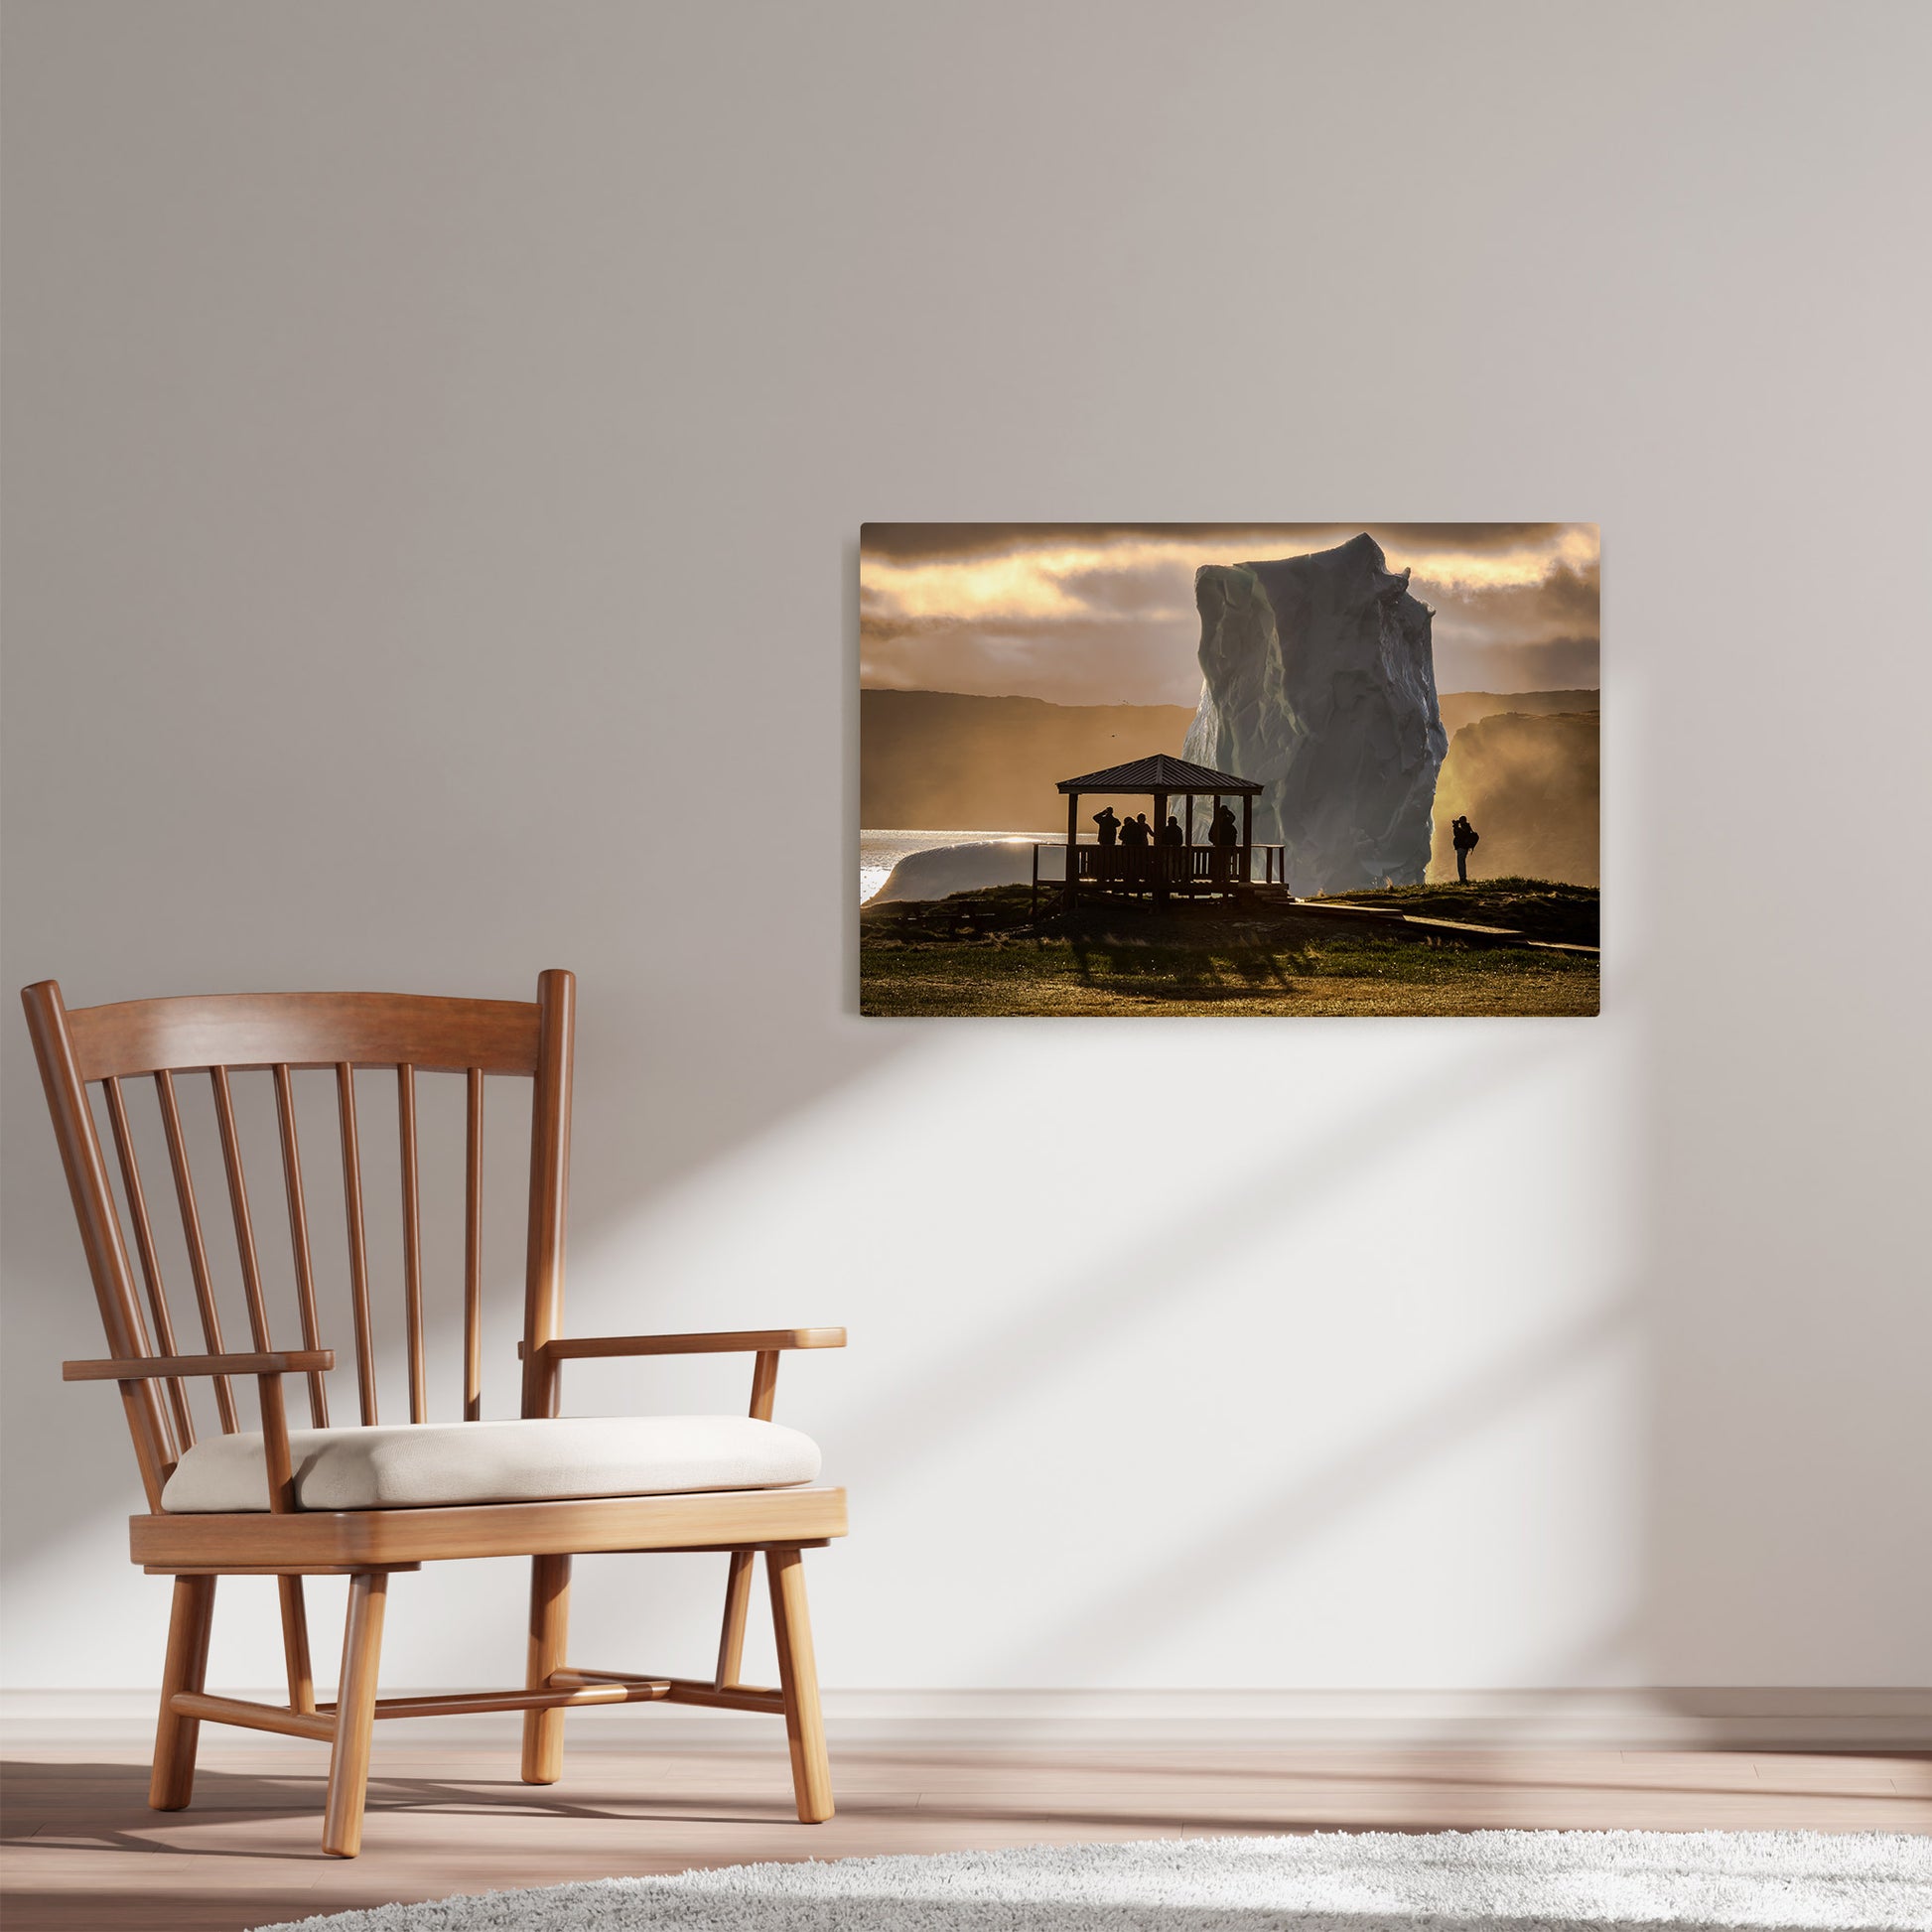 Ray Mackey's Goose Cove Iceberg Viewing photography reproduced on HD metal print and displayed on wall